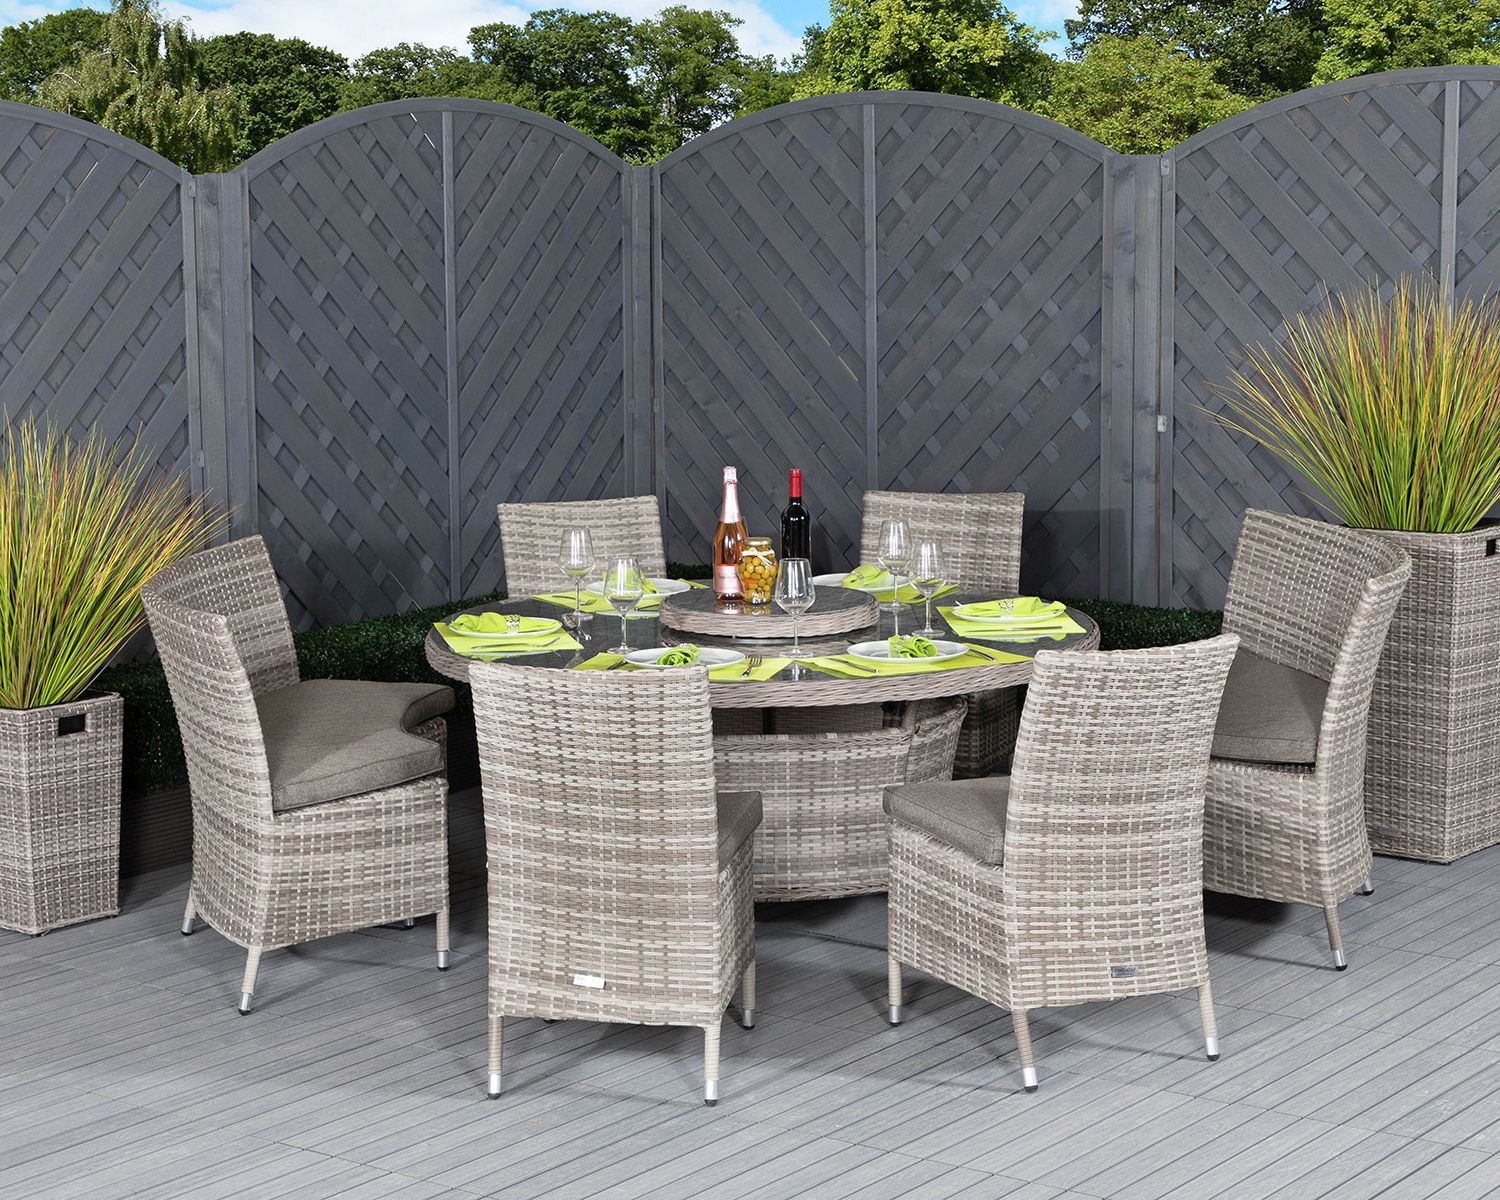 Rattan Garden Dining Set In Grey – Oxford – Rattan Garden Furniture Throughout 2019 Distressed Gray Wicker Patio Dining Sets (View 9 of 15)